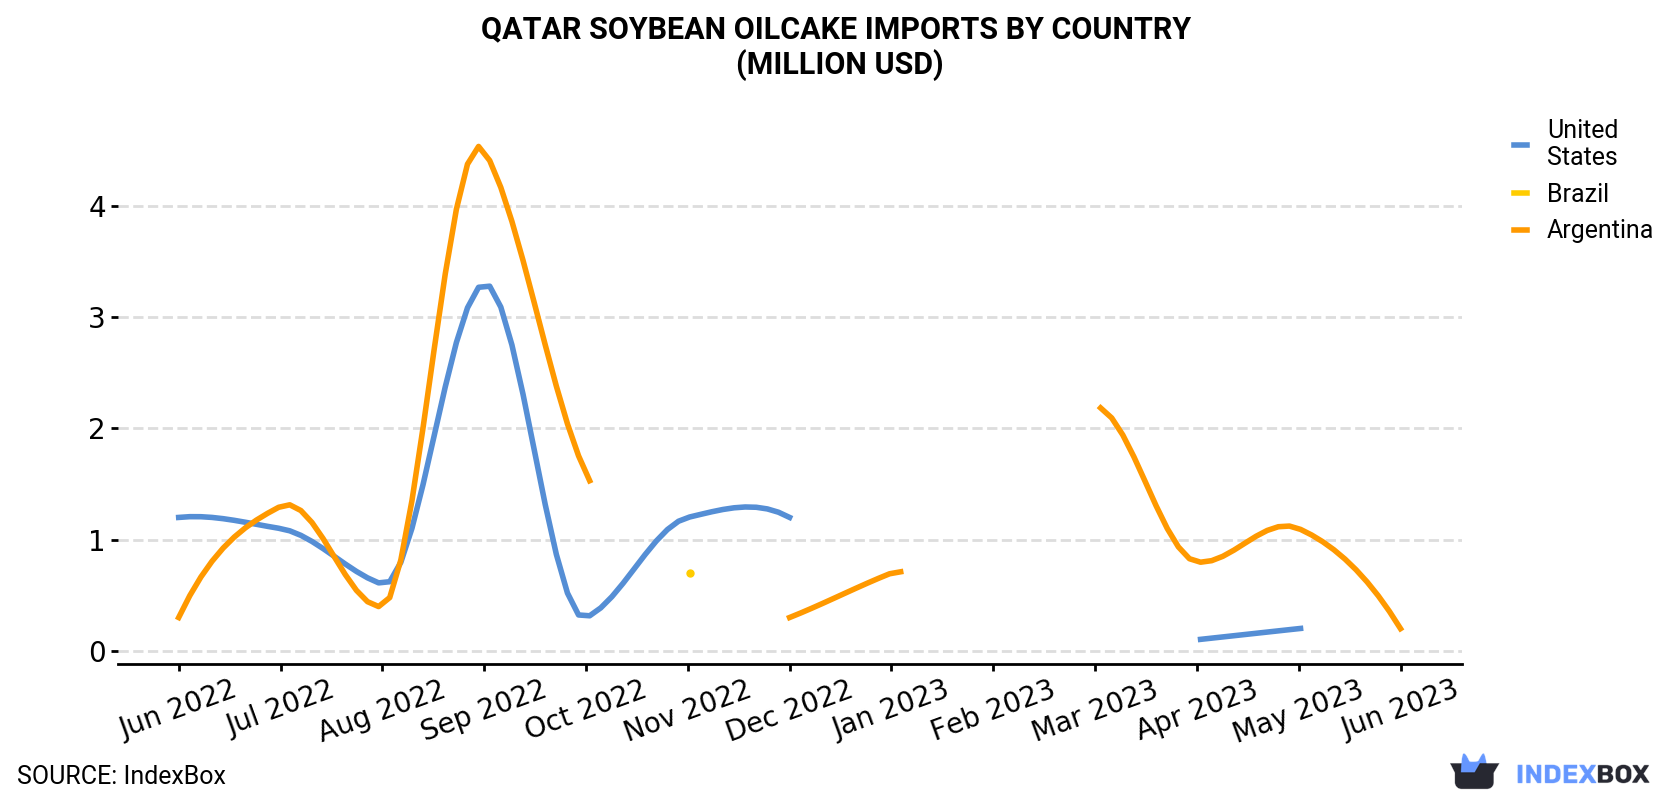 Qatar Soybean Oilcake Imports By Country (Million USD)